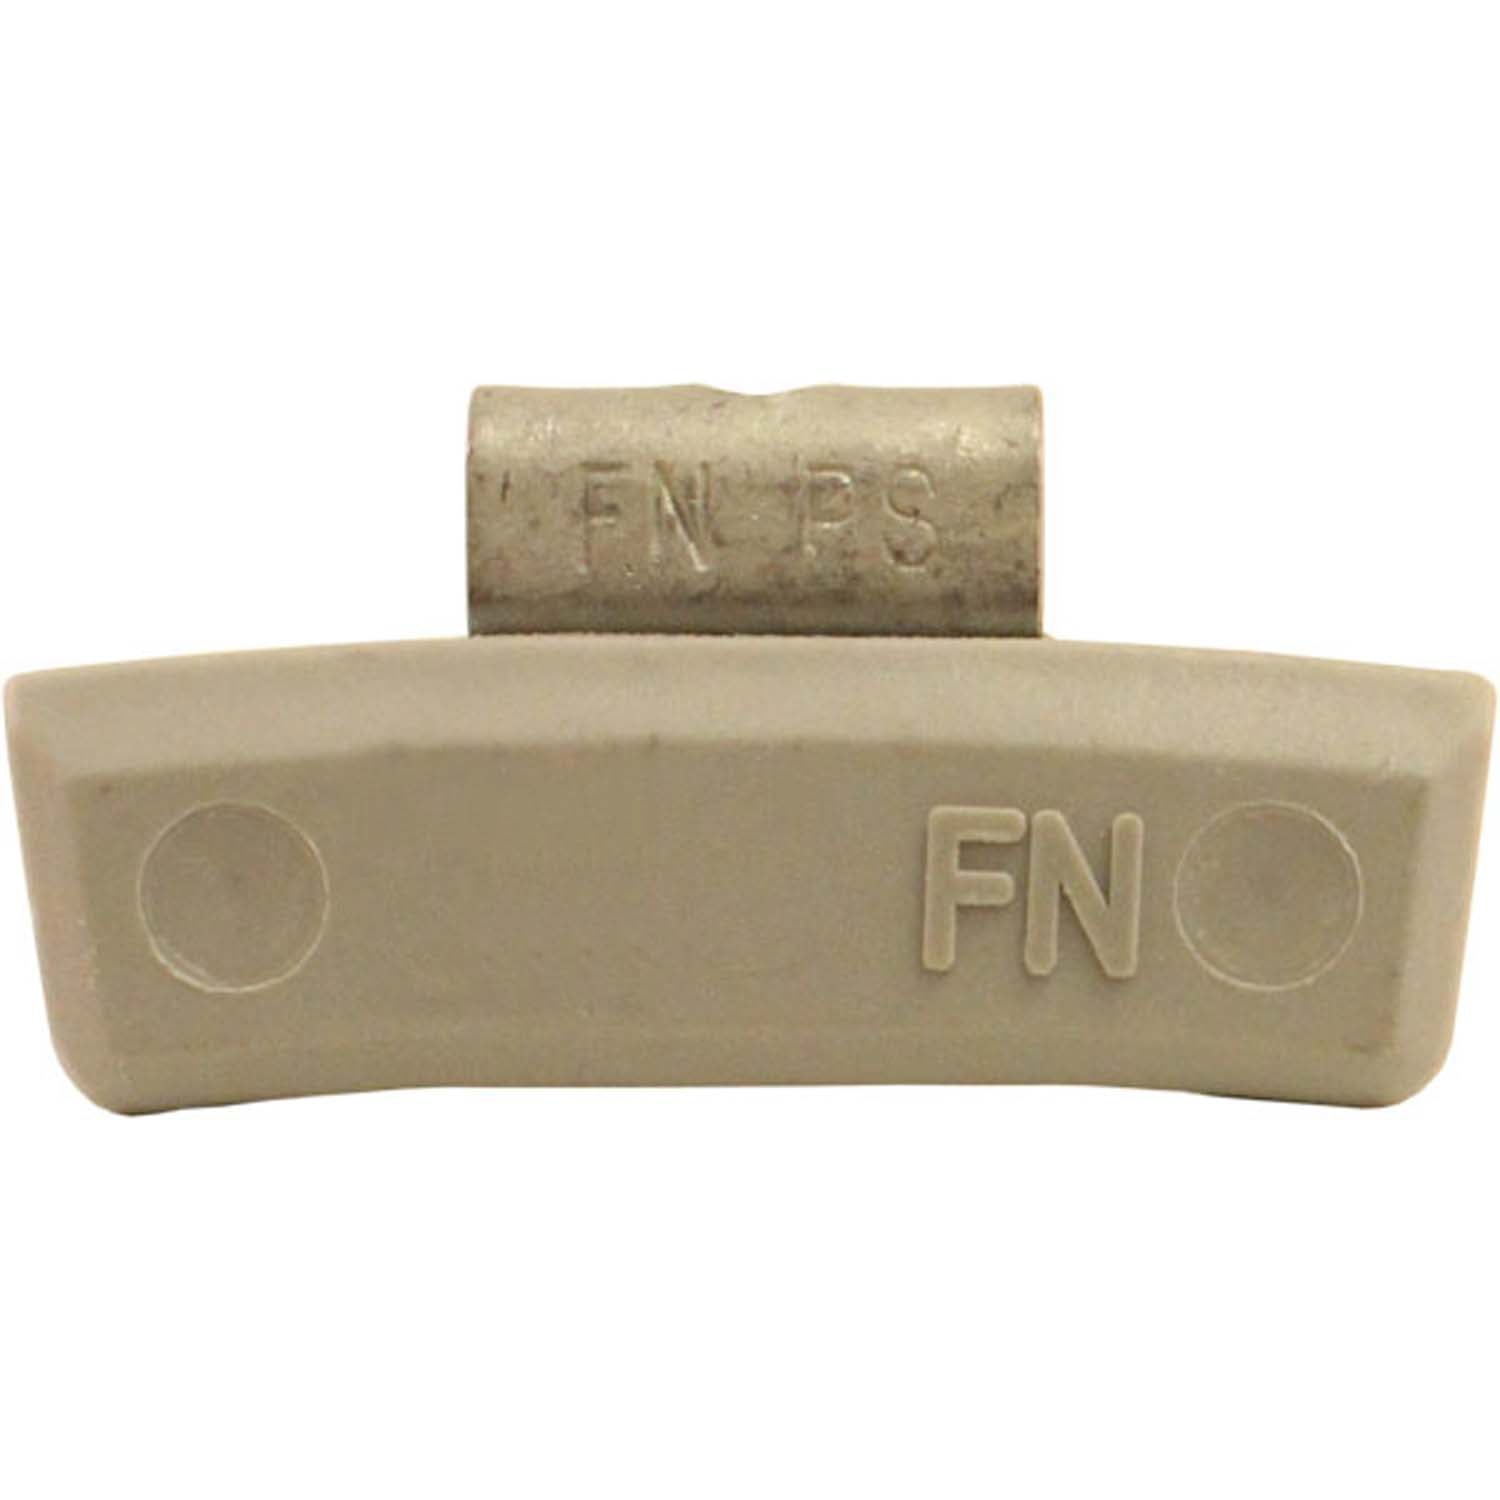 Plombco FNPS035 Plasteel Clip-On Wheel Weight 35gm - Box of 25